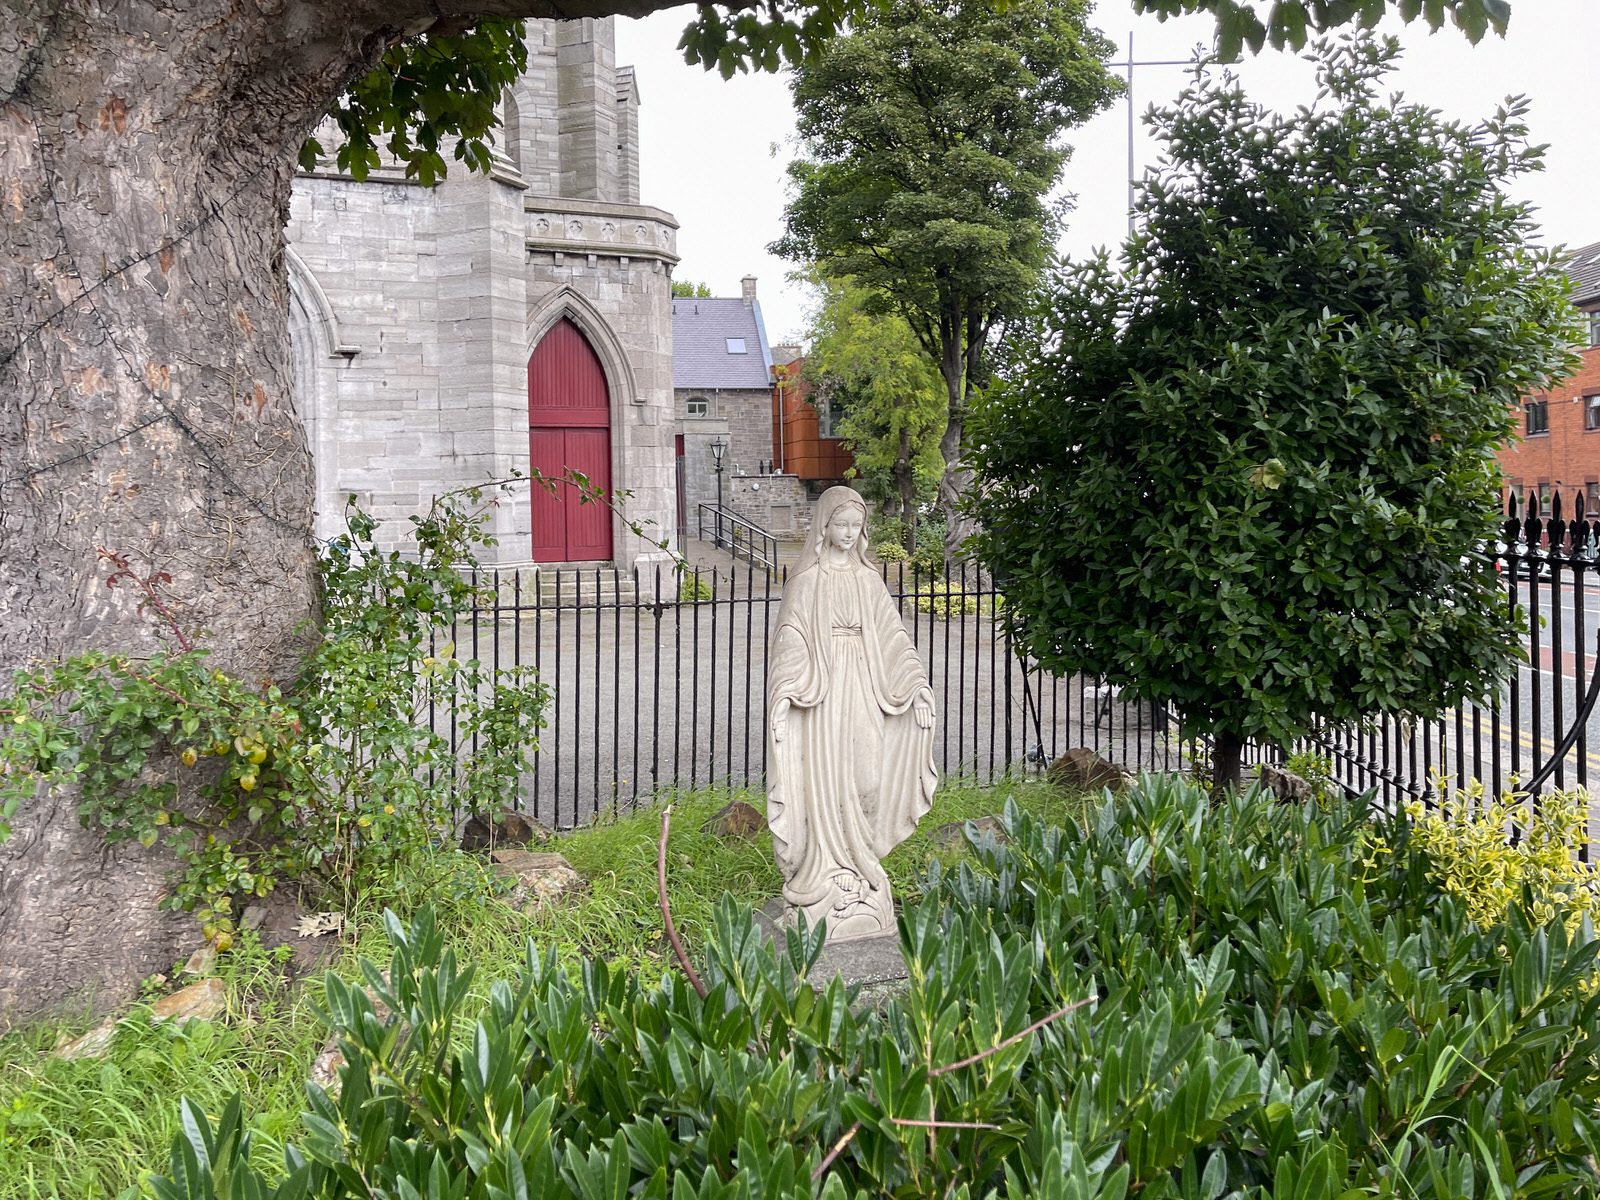 RELIGIOUS STATUES IN THE DOCKLANDS [ST LAURENCE O'TOOLE'S CHURCH]-225670-1